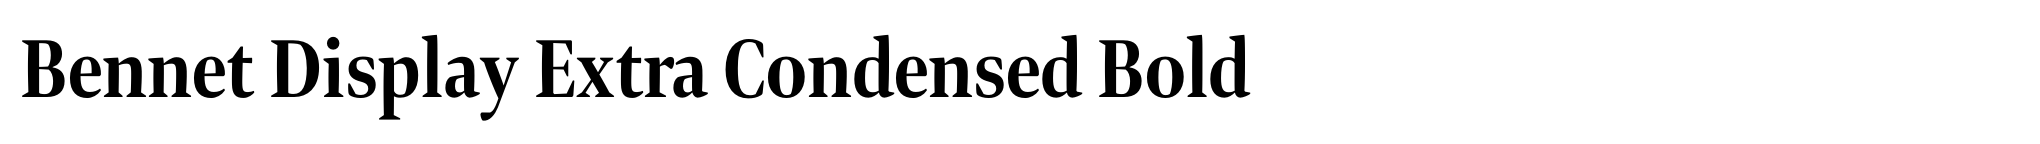 Bennet Display Extra Condensed Bold image